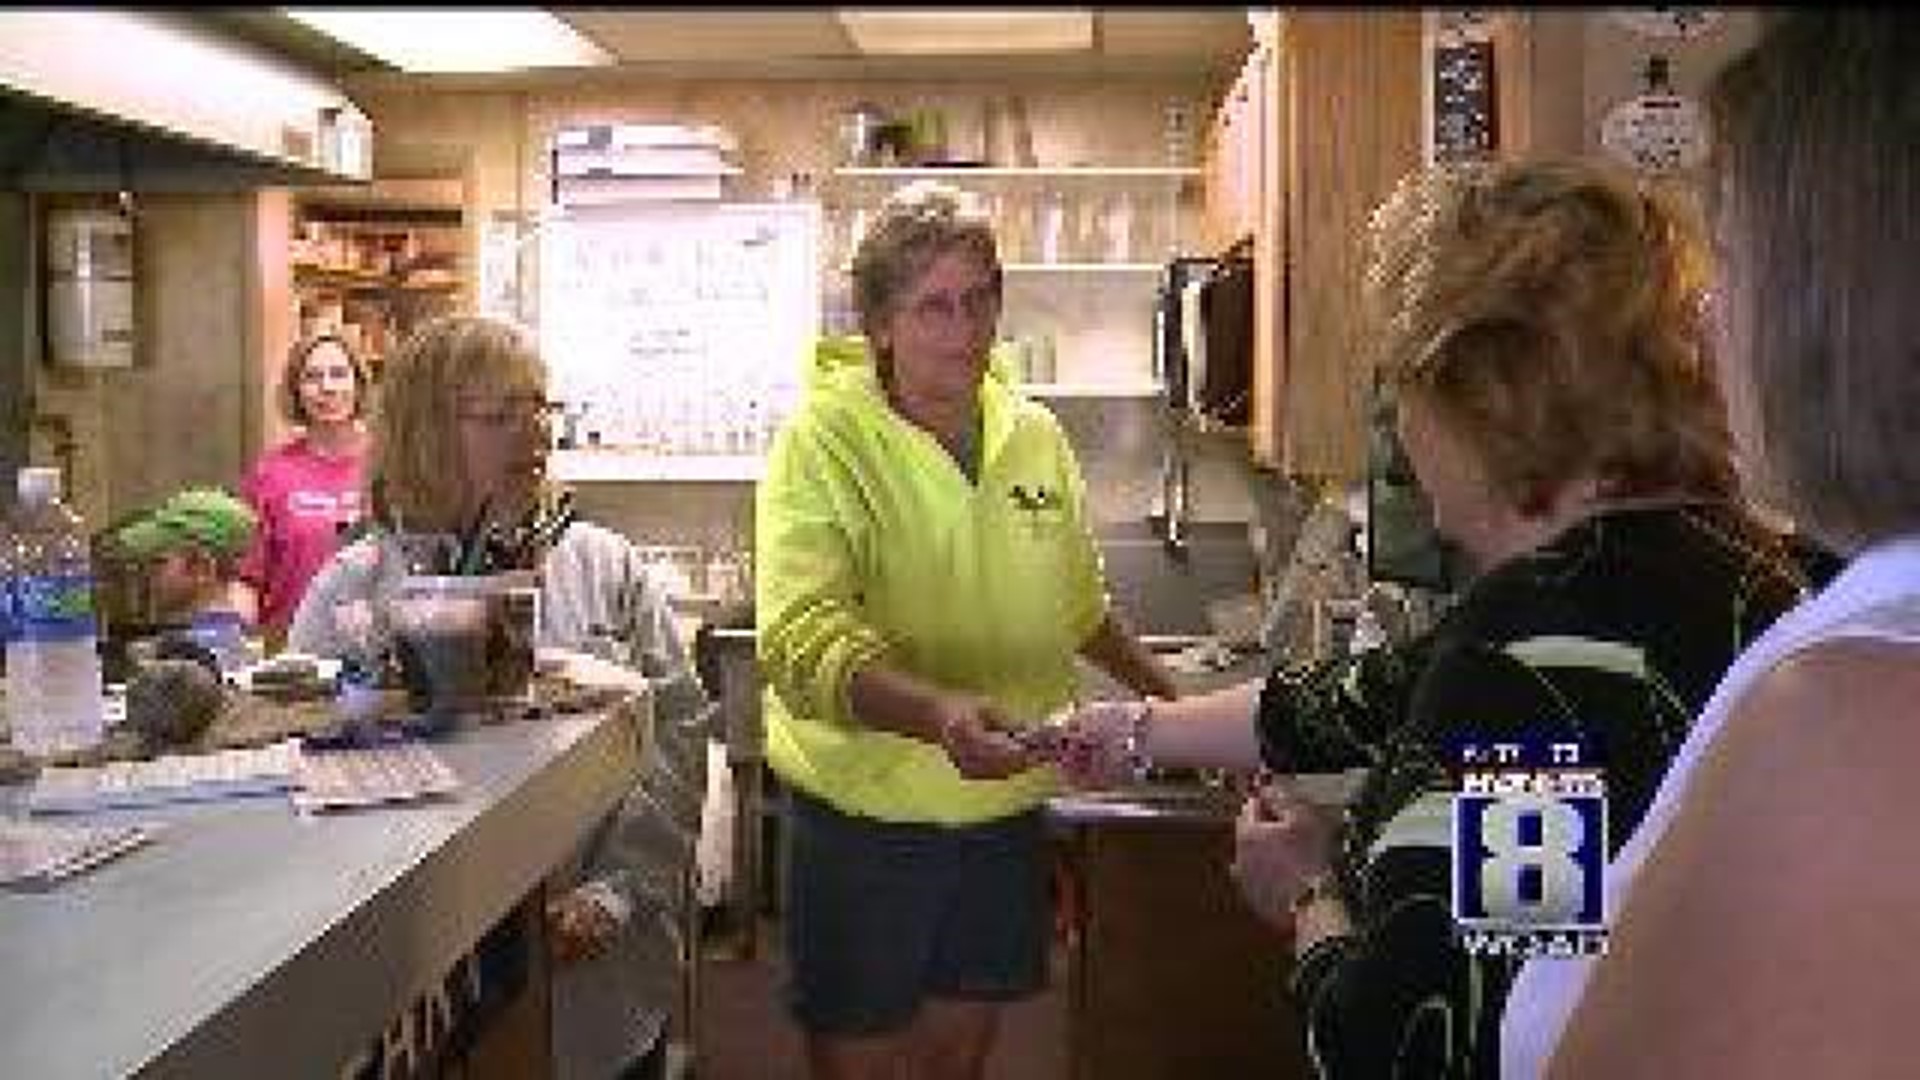 News 8 "Pays It Forward" To "The Girls"